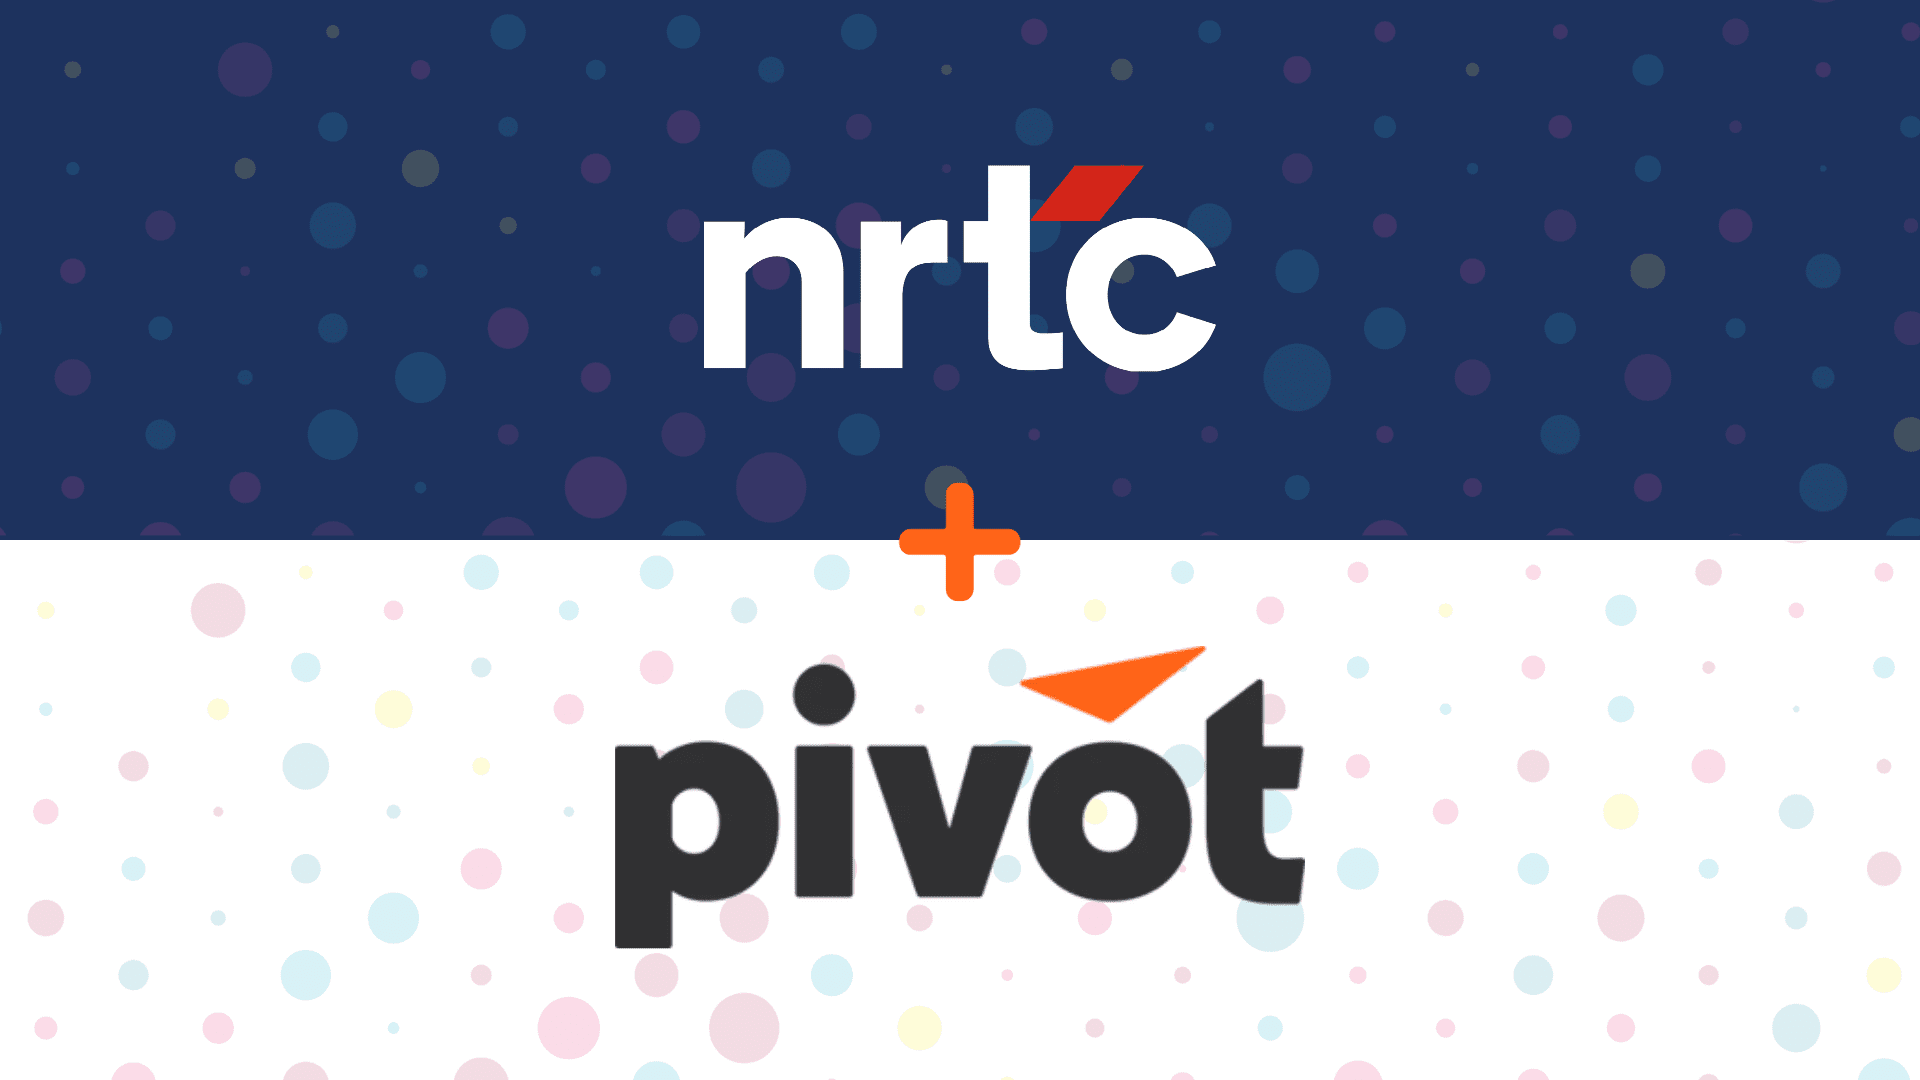 Pivot joins NRTC - What does it mean for you?